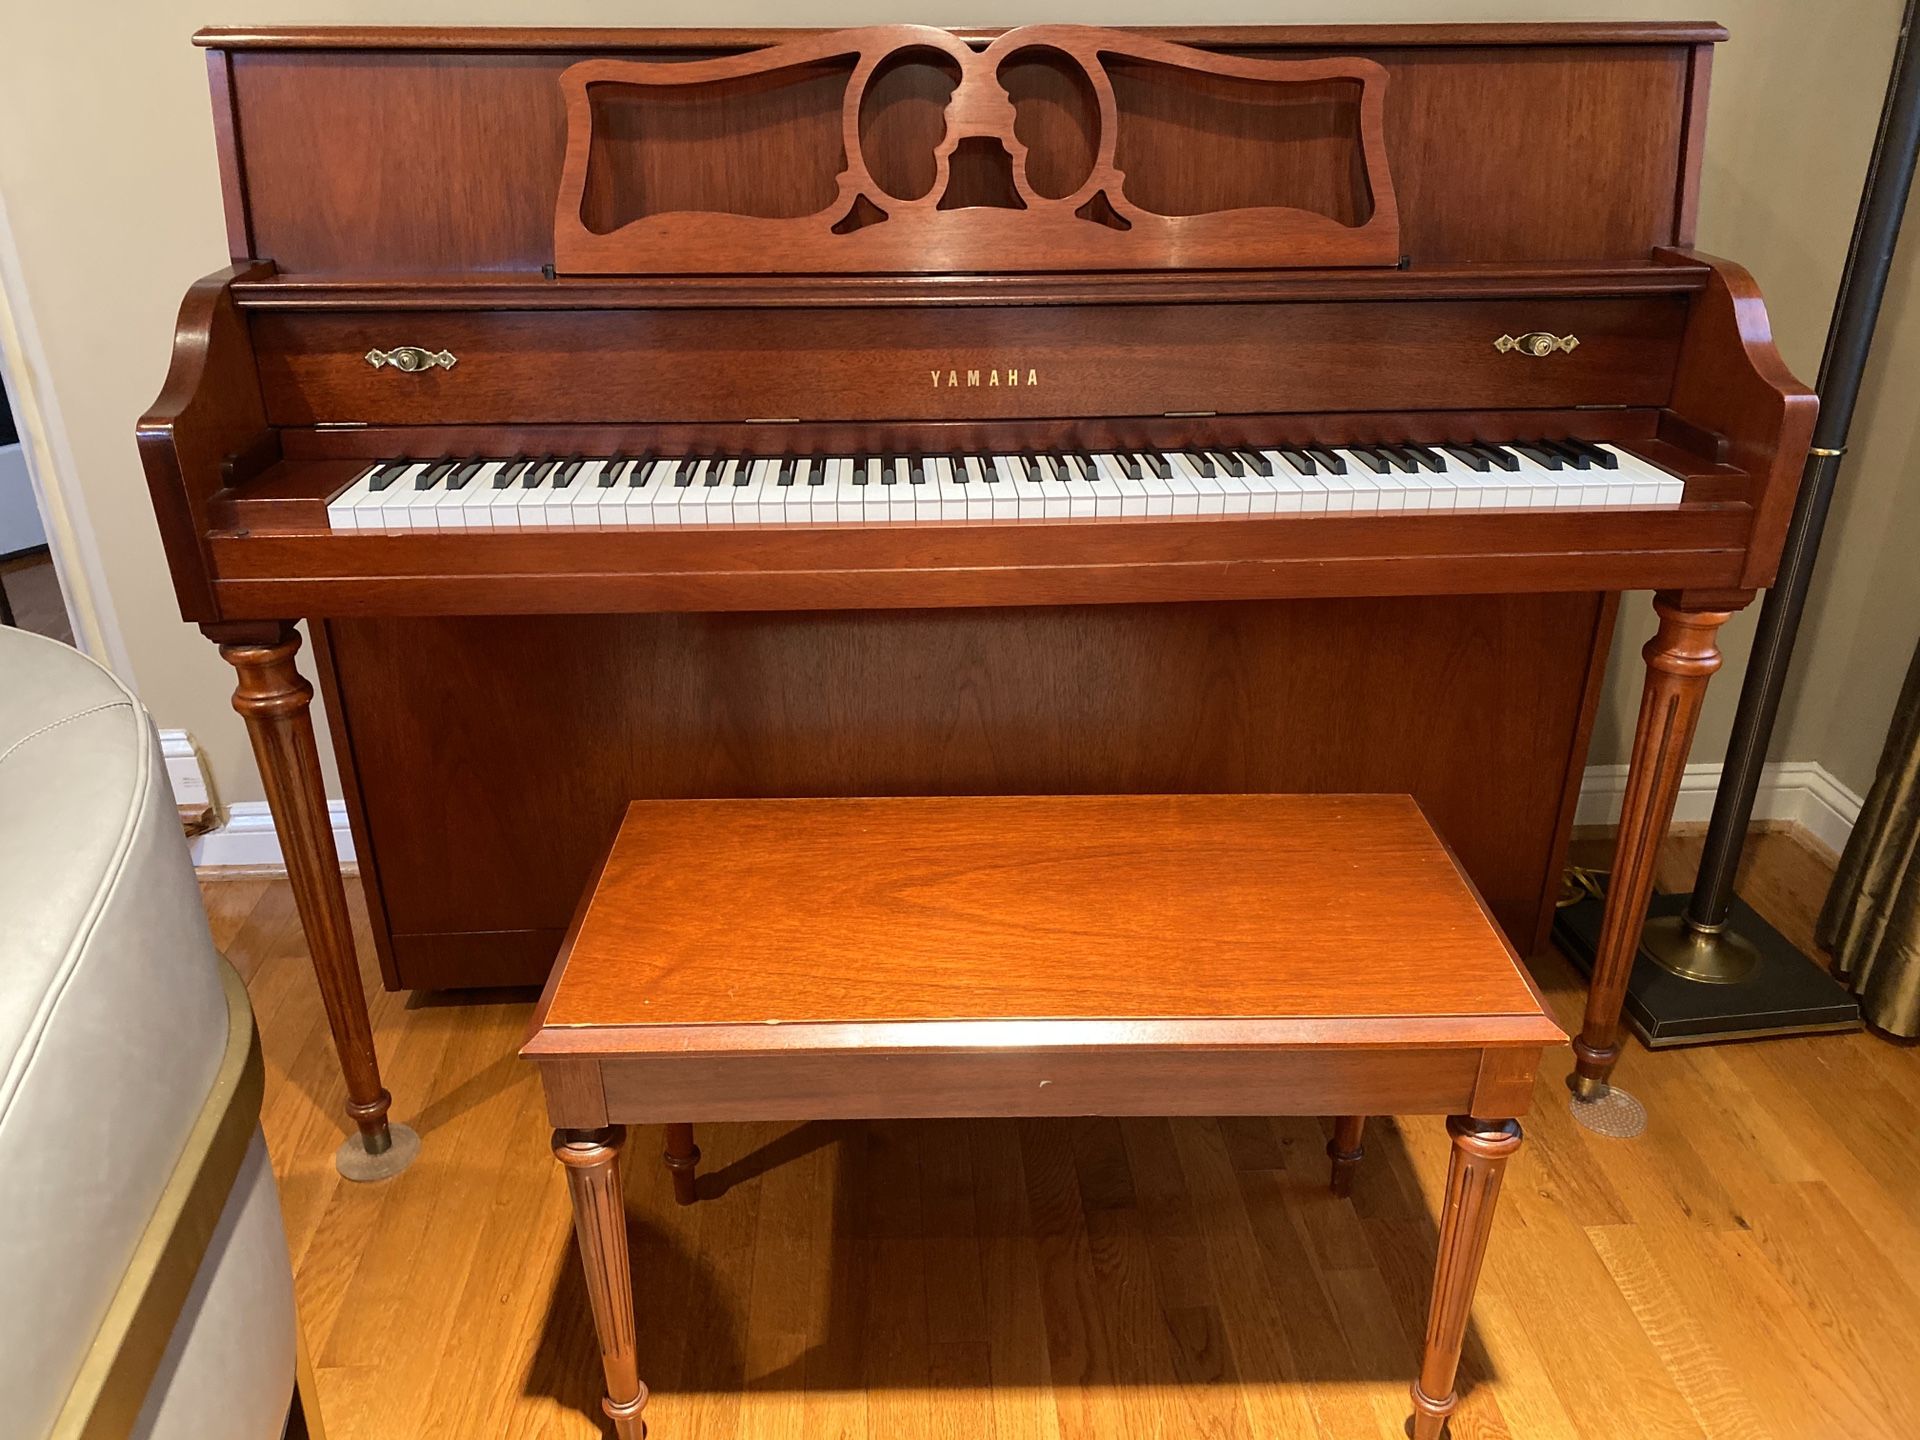 Yamaha upright piano and bench, approximately five years old in like new condition. Moving and must sale.